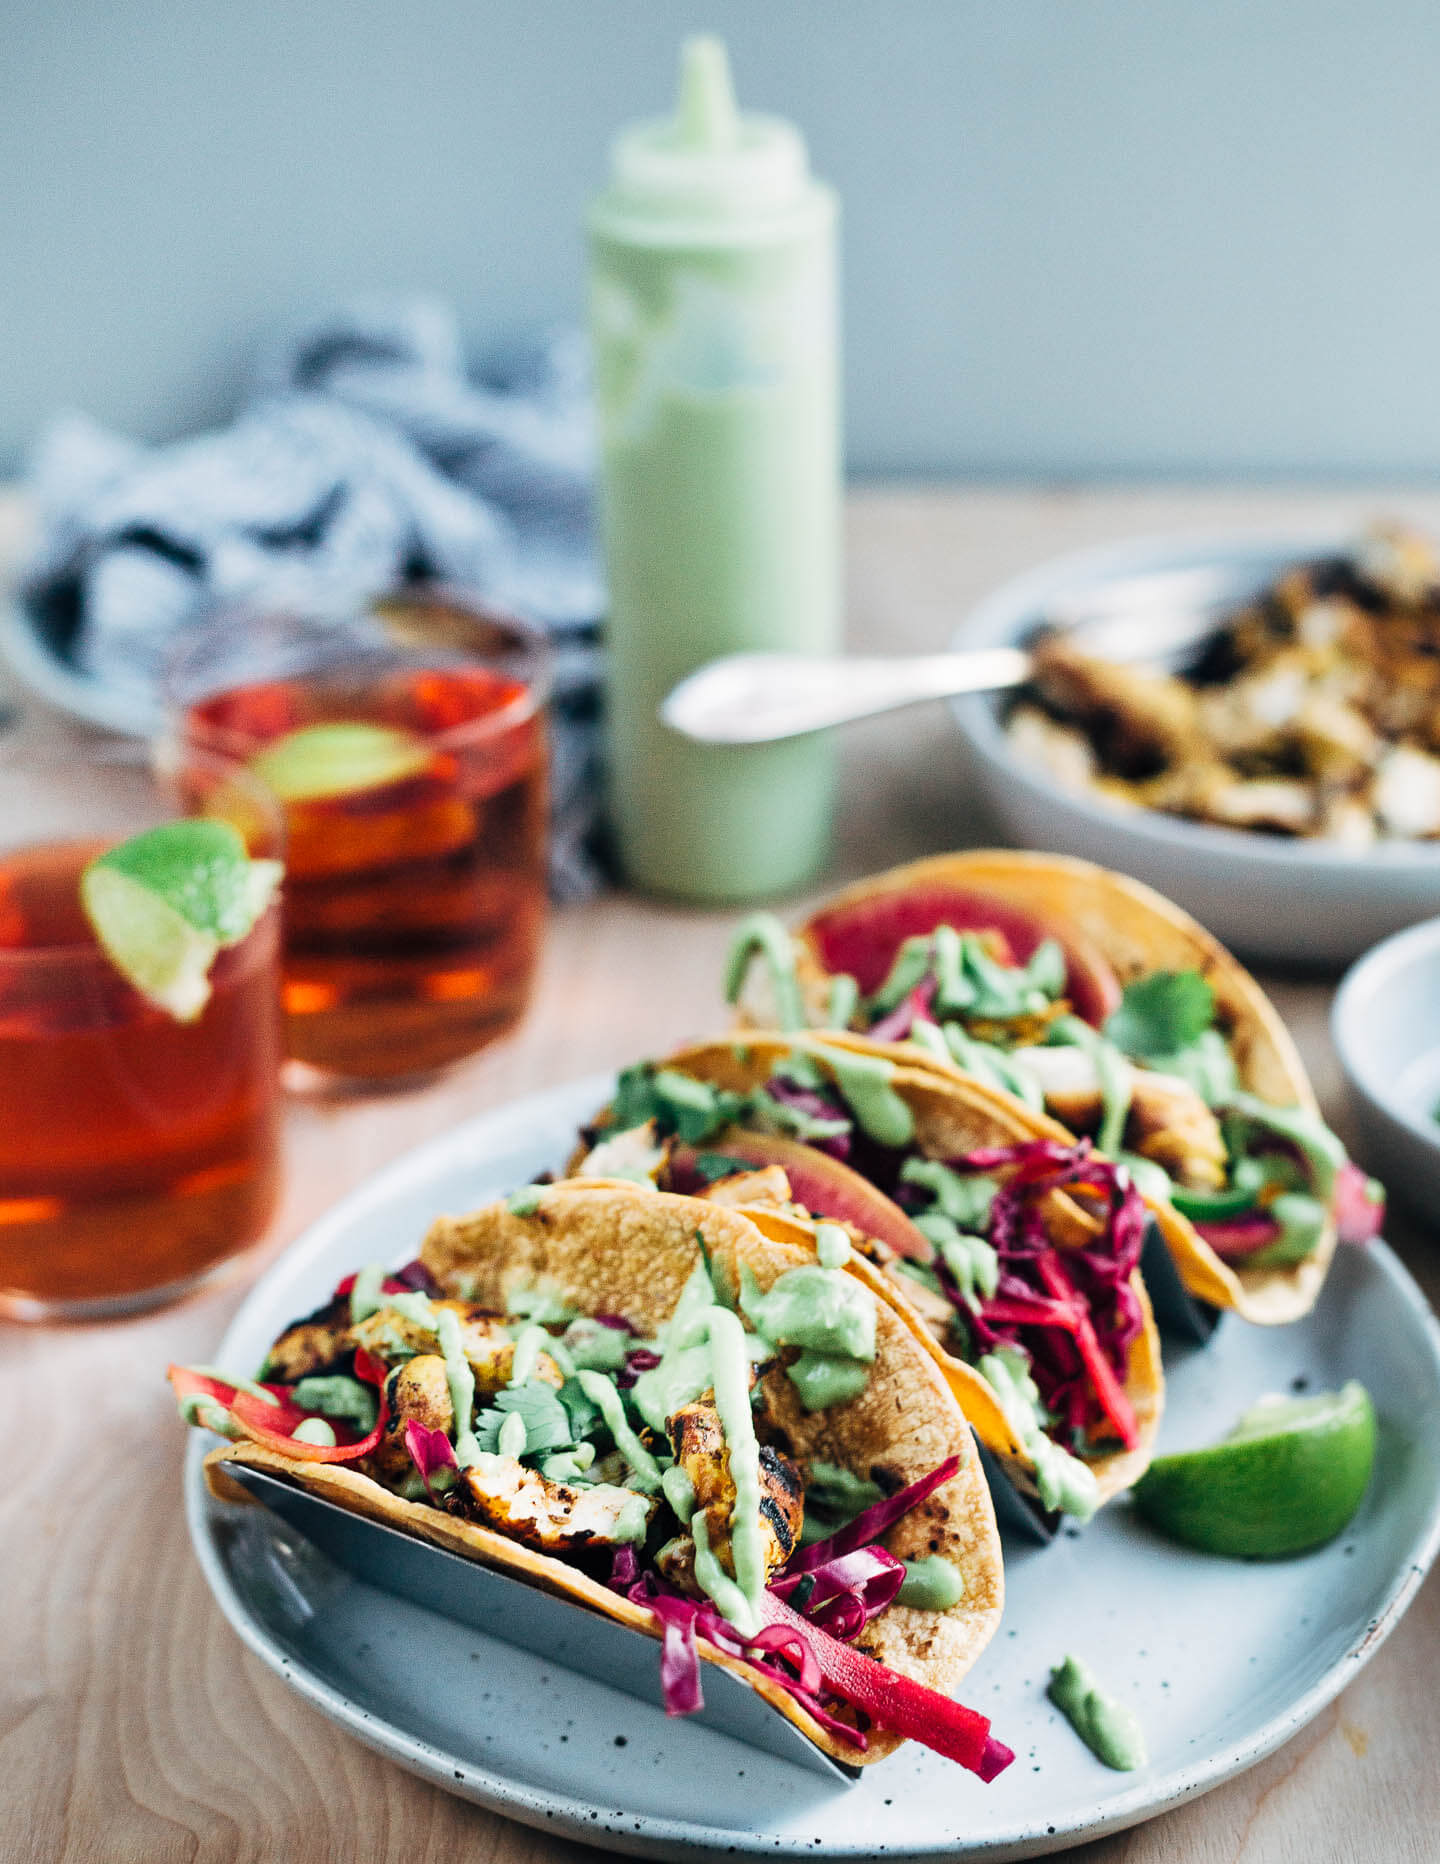 These quick and easy grilled chicken tacos start with a vibrant orange and lime juice marinade, and are layered with avocado-lime sauce, and a simple red cabbage and radish slaw.